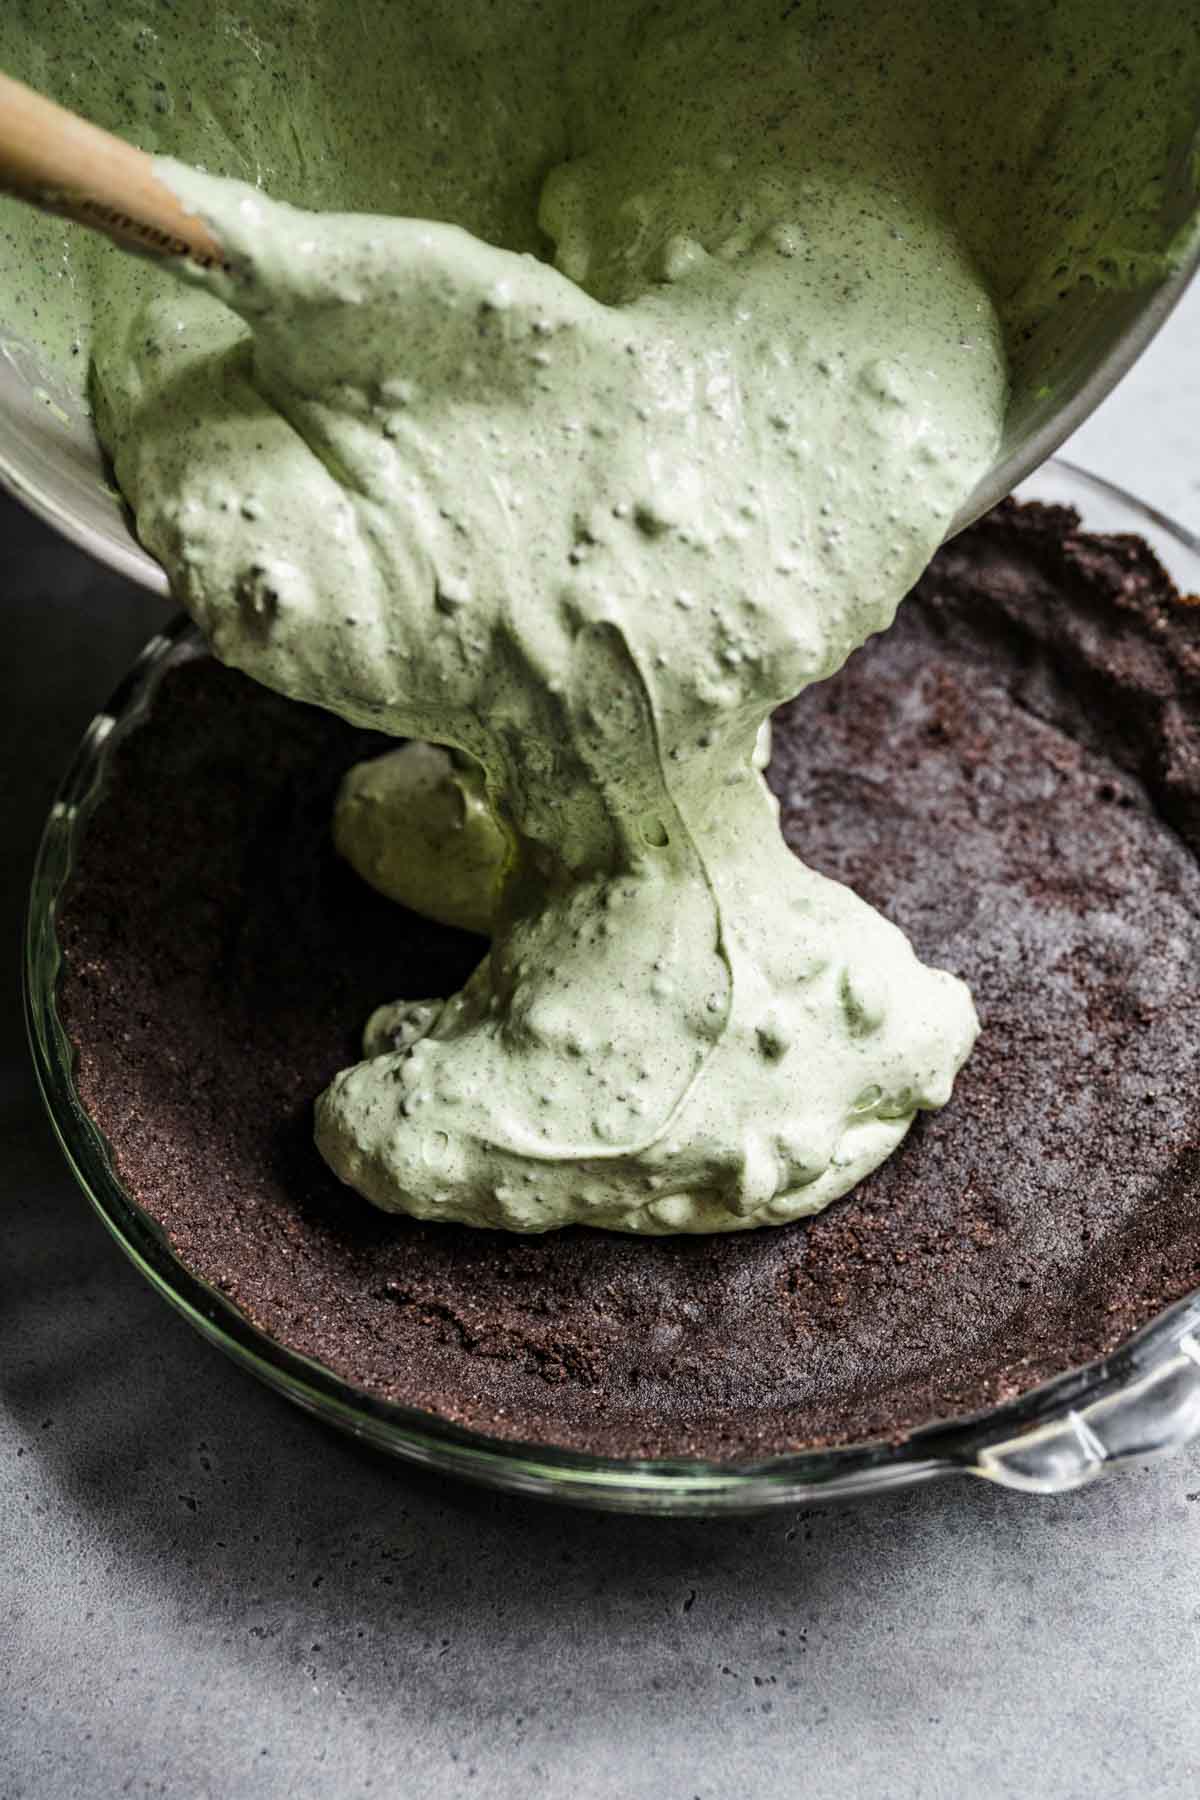 Grasshopper Pie pouring filling into crust